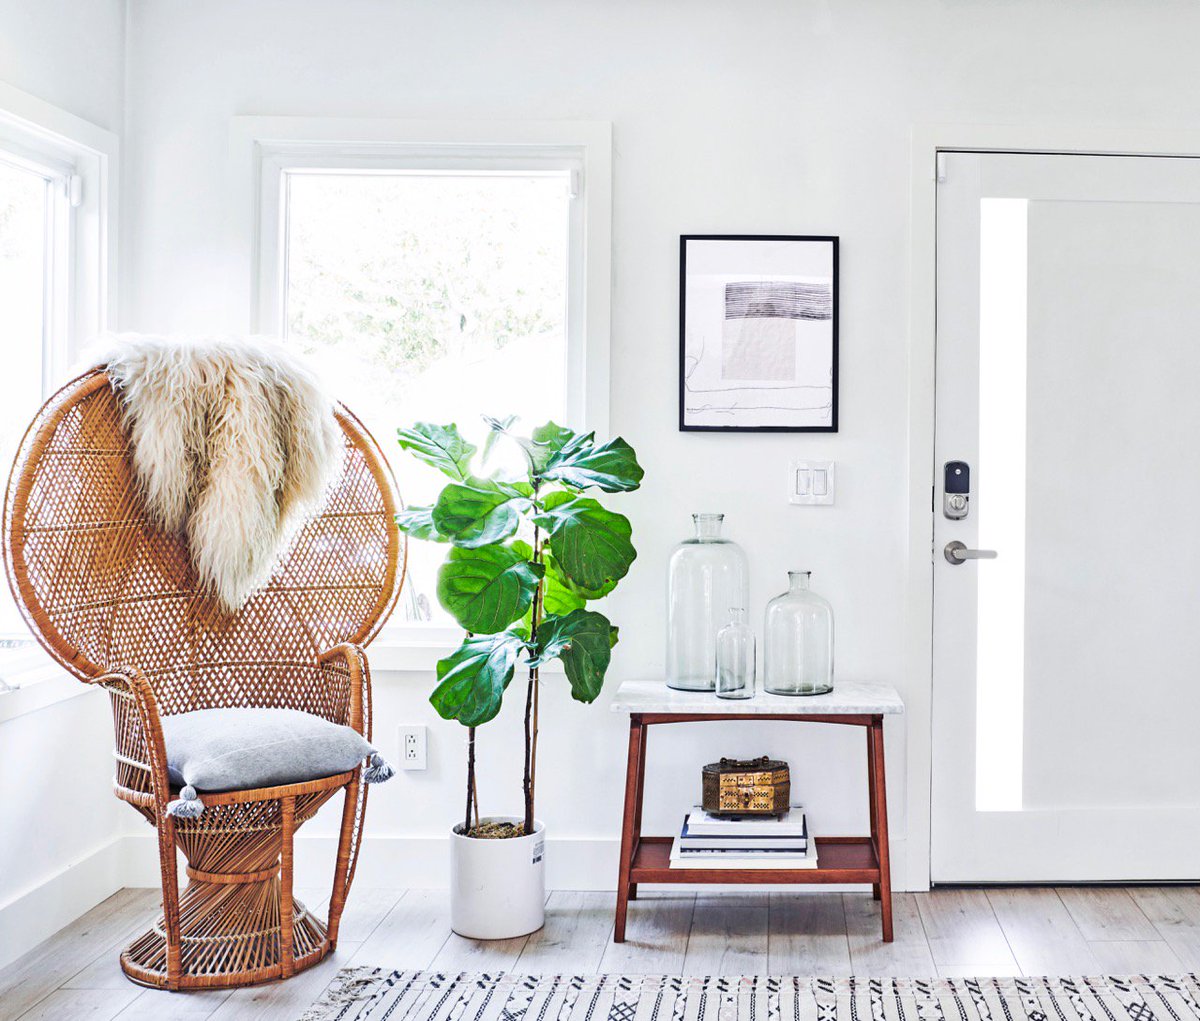 Featured: the home of Erika Wadler @homeslicehome: 'It's pretty incredible how you can completely change your entryway just by swapping out a chair. You can go from boho to mid-century with minimal effort.”  Also featured: Yale Assure Lock + Kincaid lever. #yalelocks #smartlocks